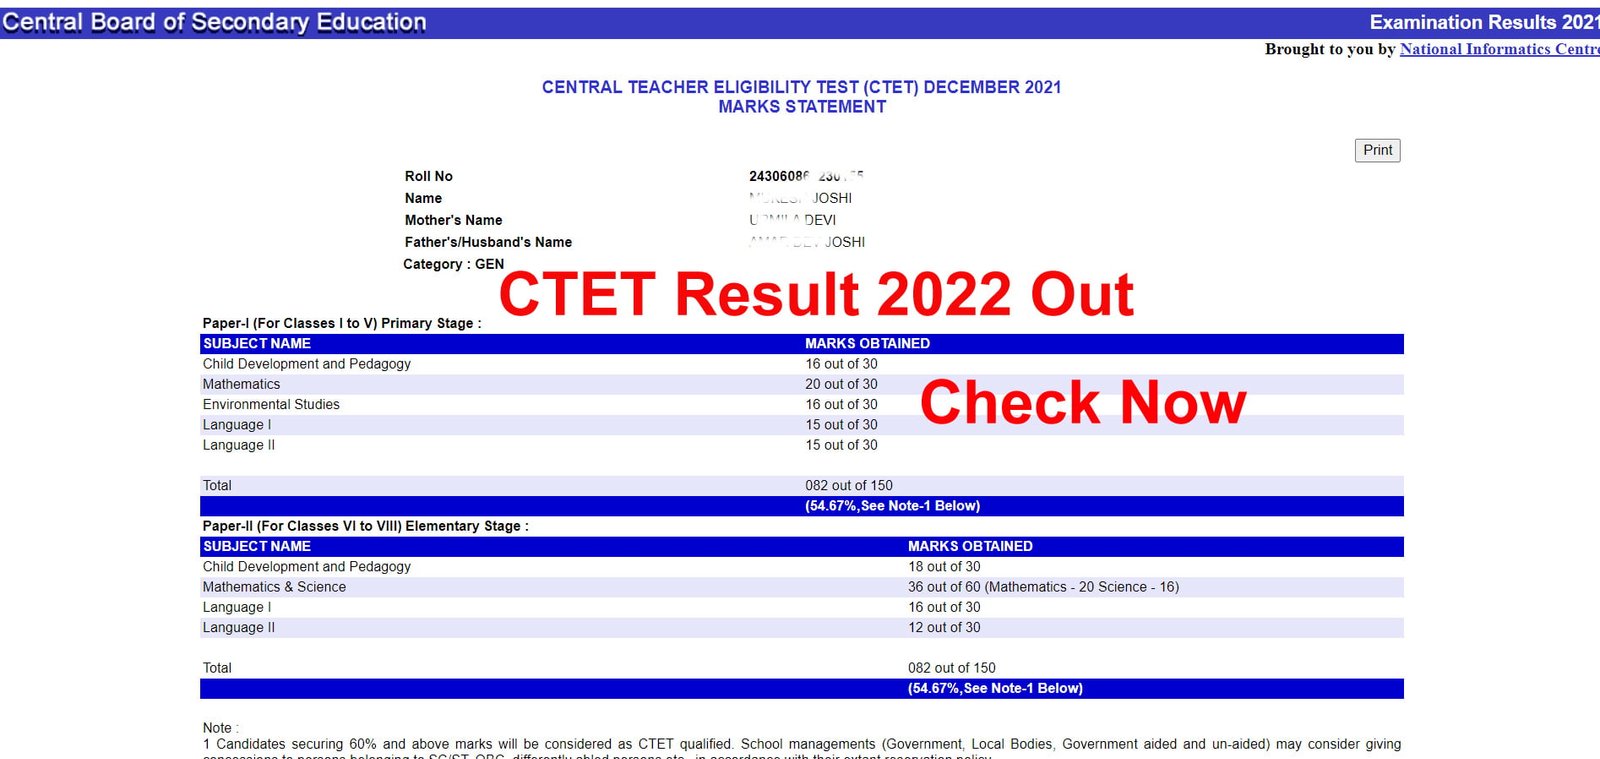 CTET Result 2022 Out Now How to Check ctet.nic.in Link Here All Jobs